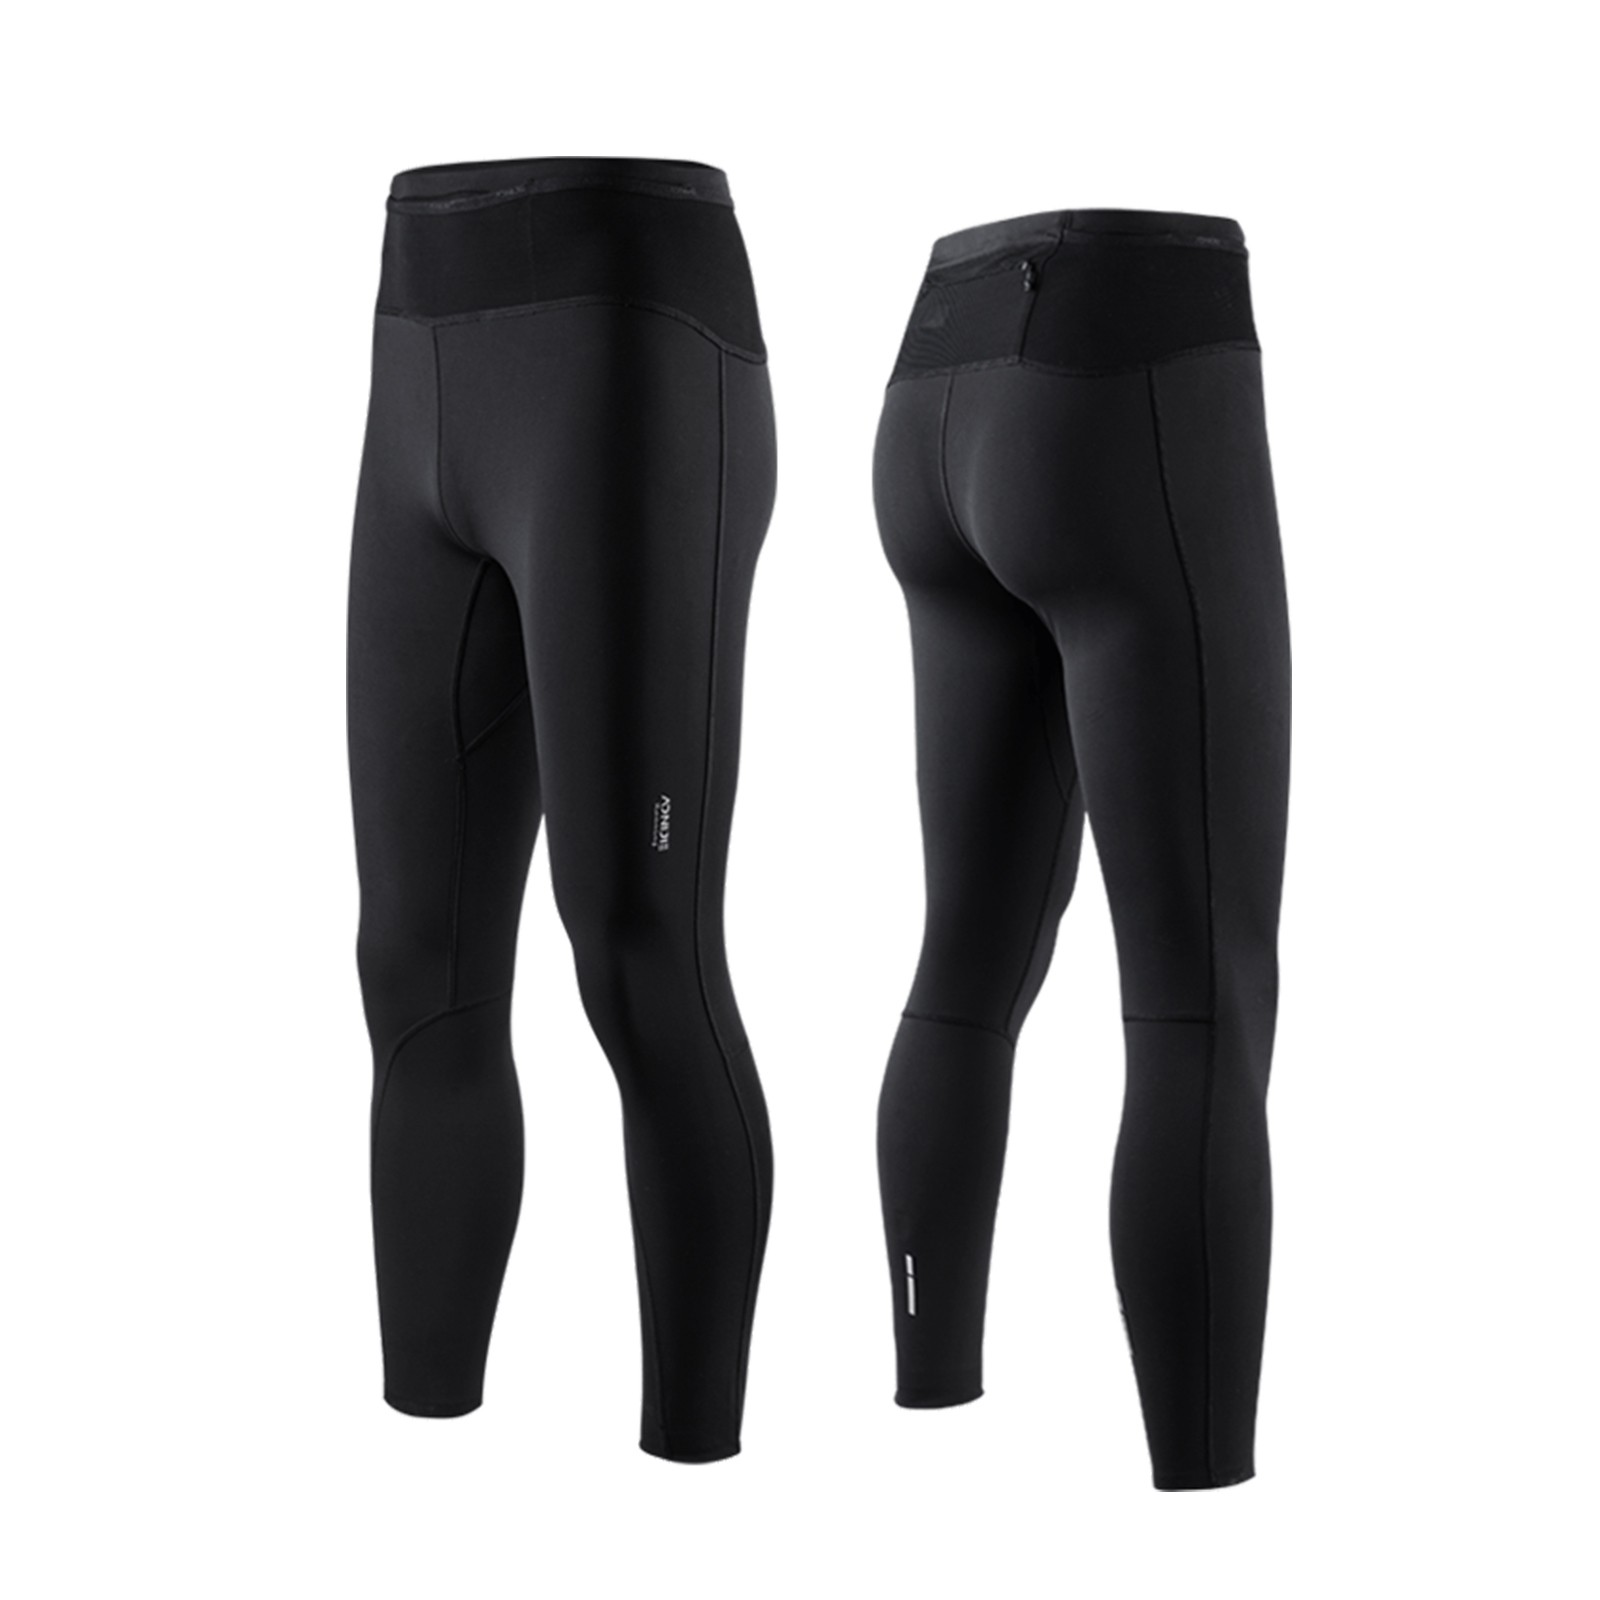 AONIJIE FM5121 Man Sports Compression Pants Running Long Leggings Elastic Tights Trousers Quick Drying Cycling Fitness Pants with Pocket